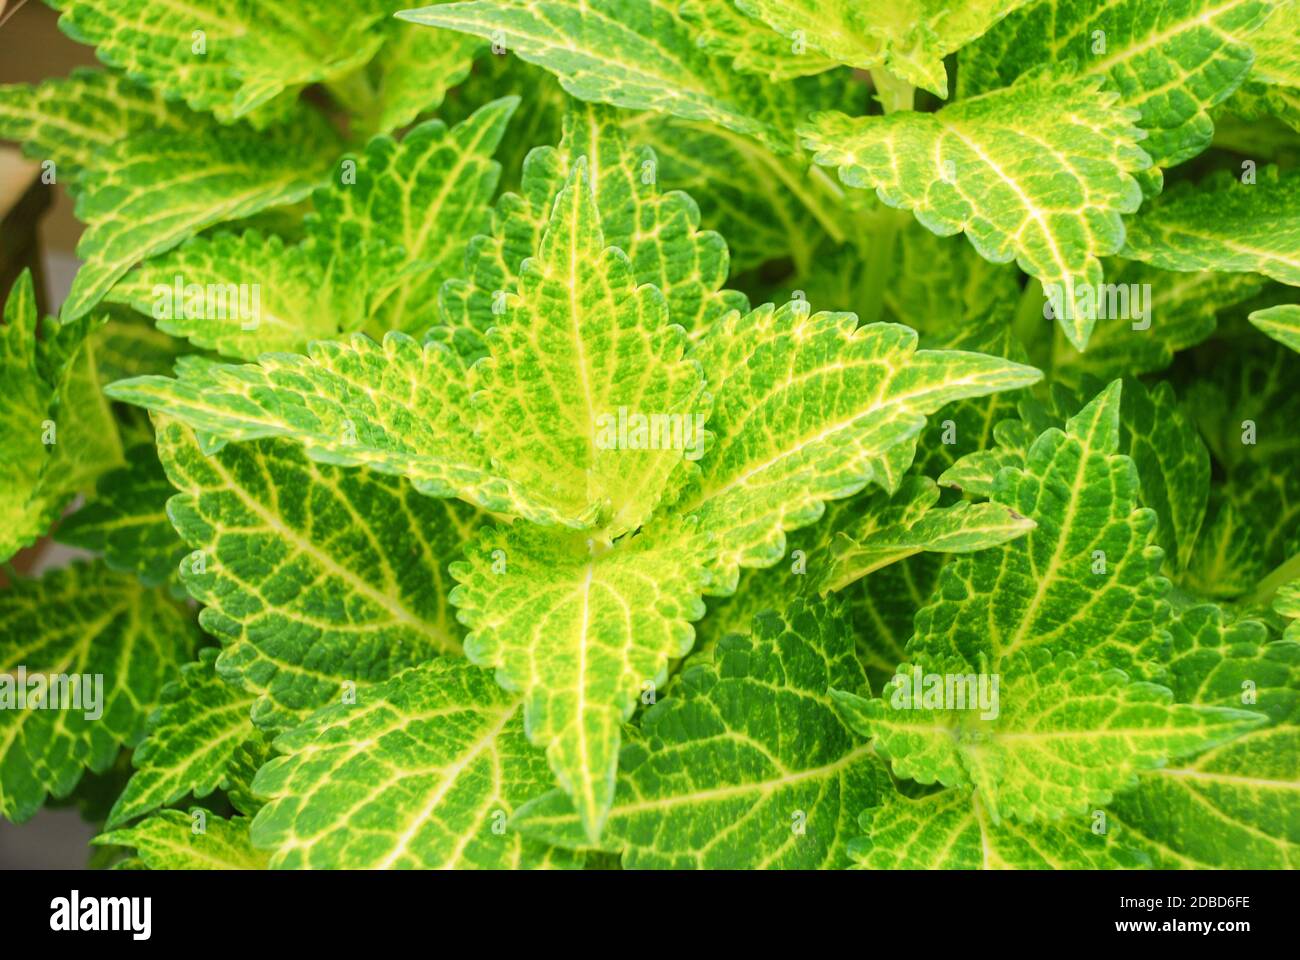 Green and yellow leaves of the coleus plant, Plectranthus scutellarioides Stock Photo